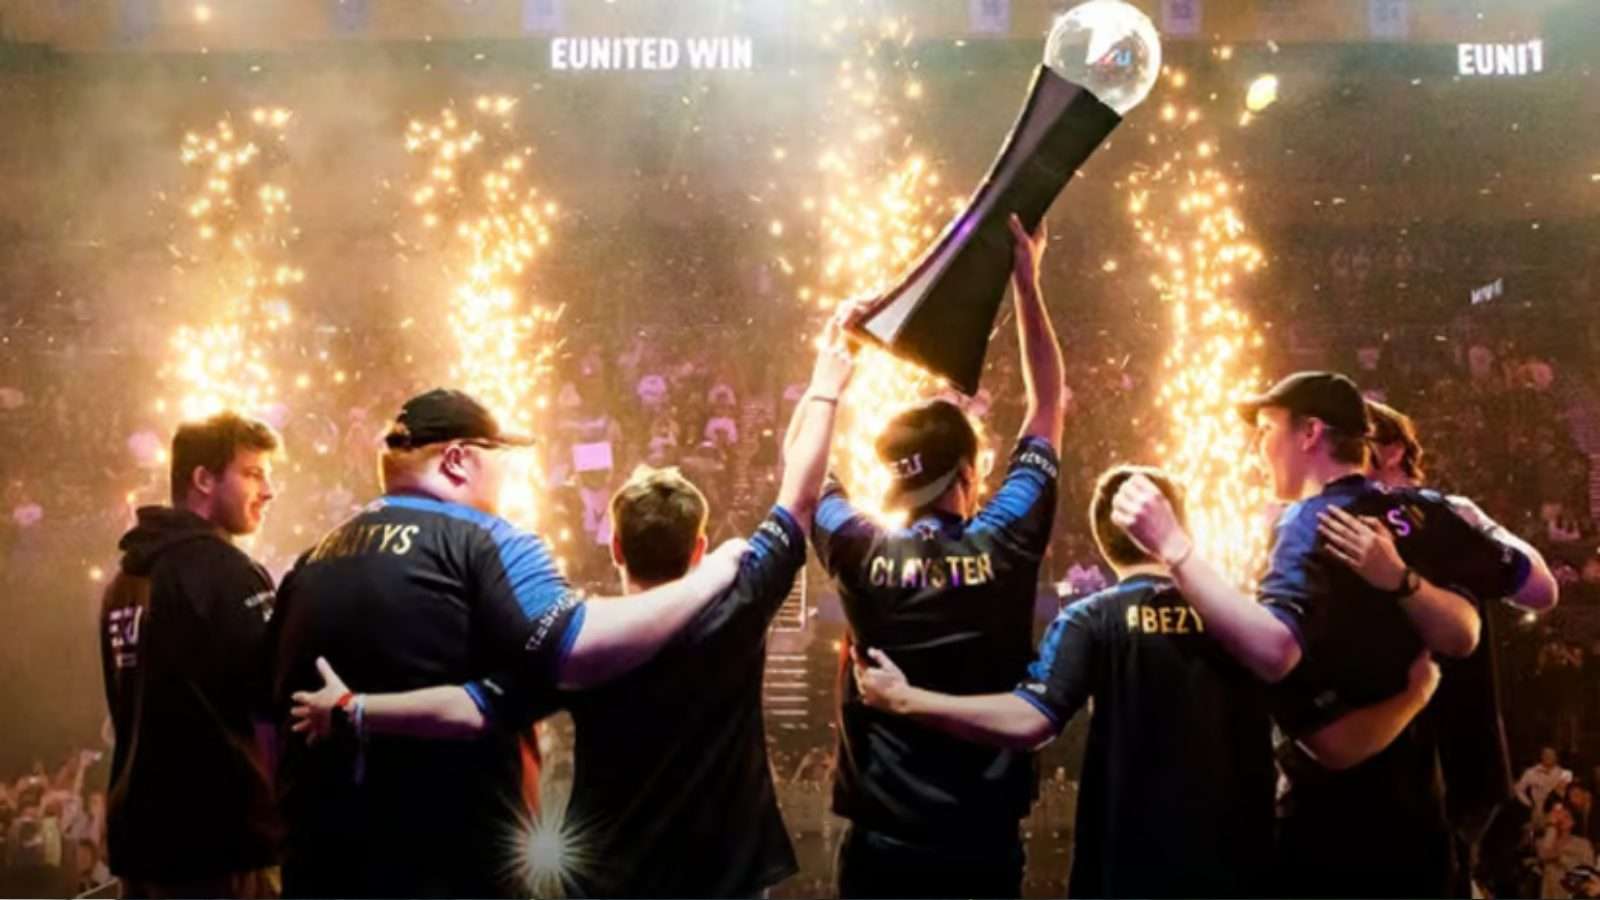 Call of Duty professional team E-United winning the 2019 Call of Duty World League Championship.